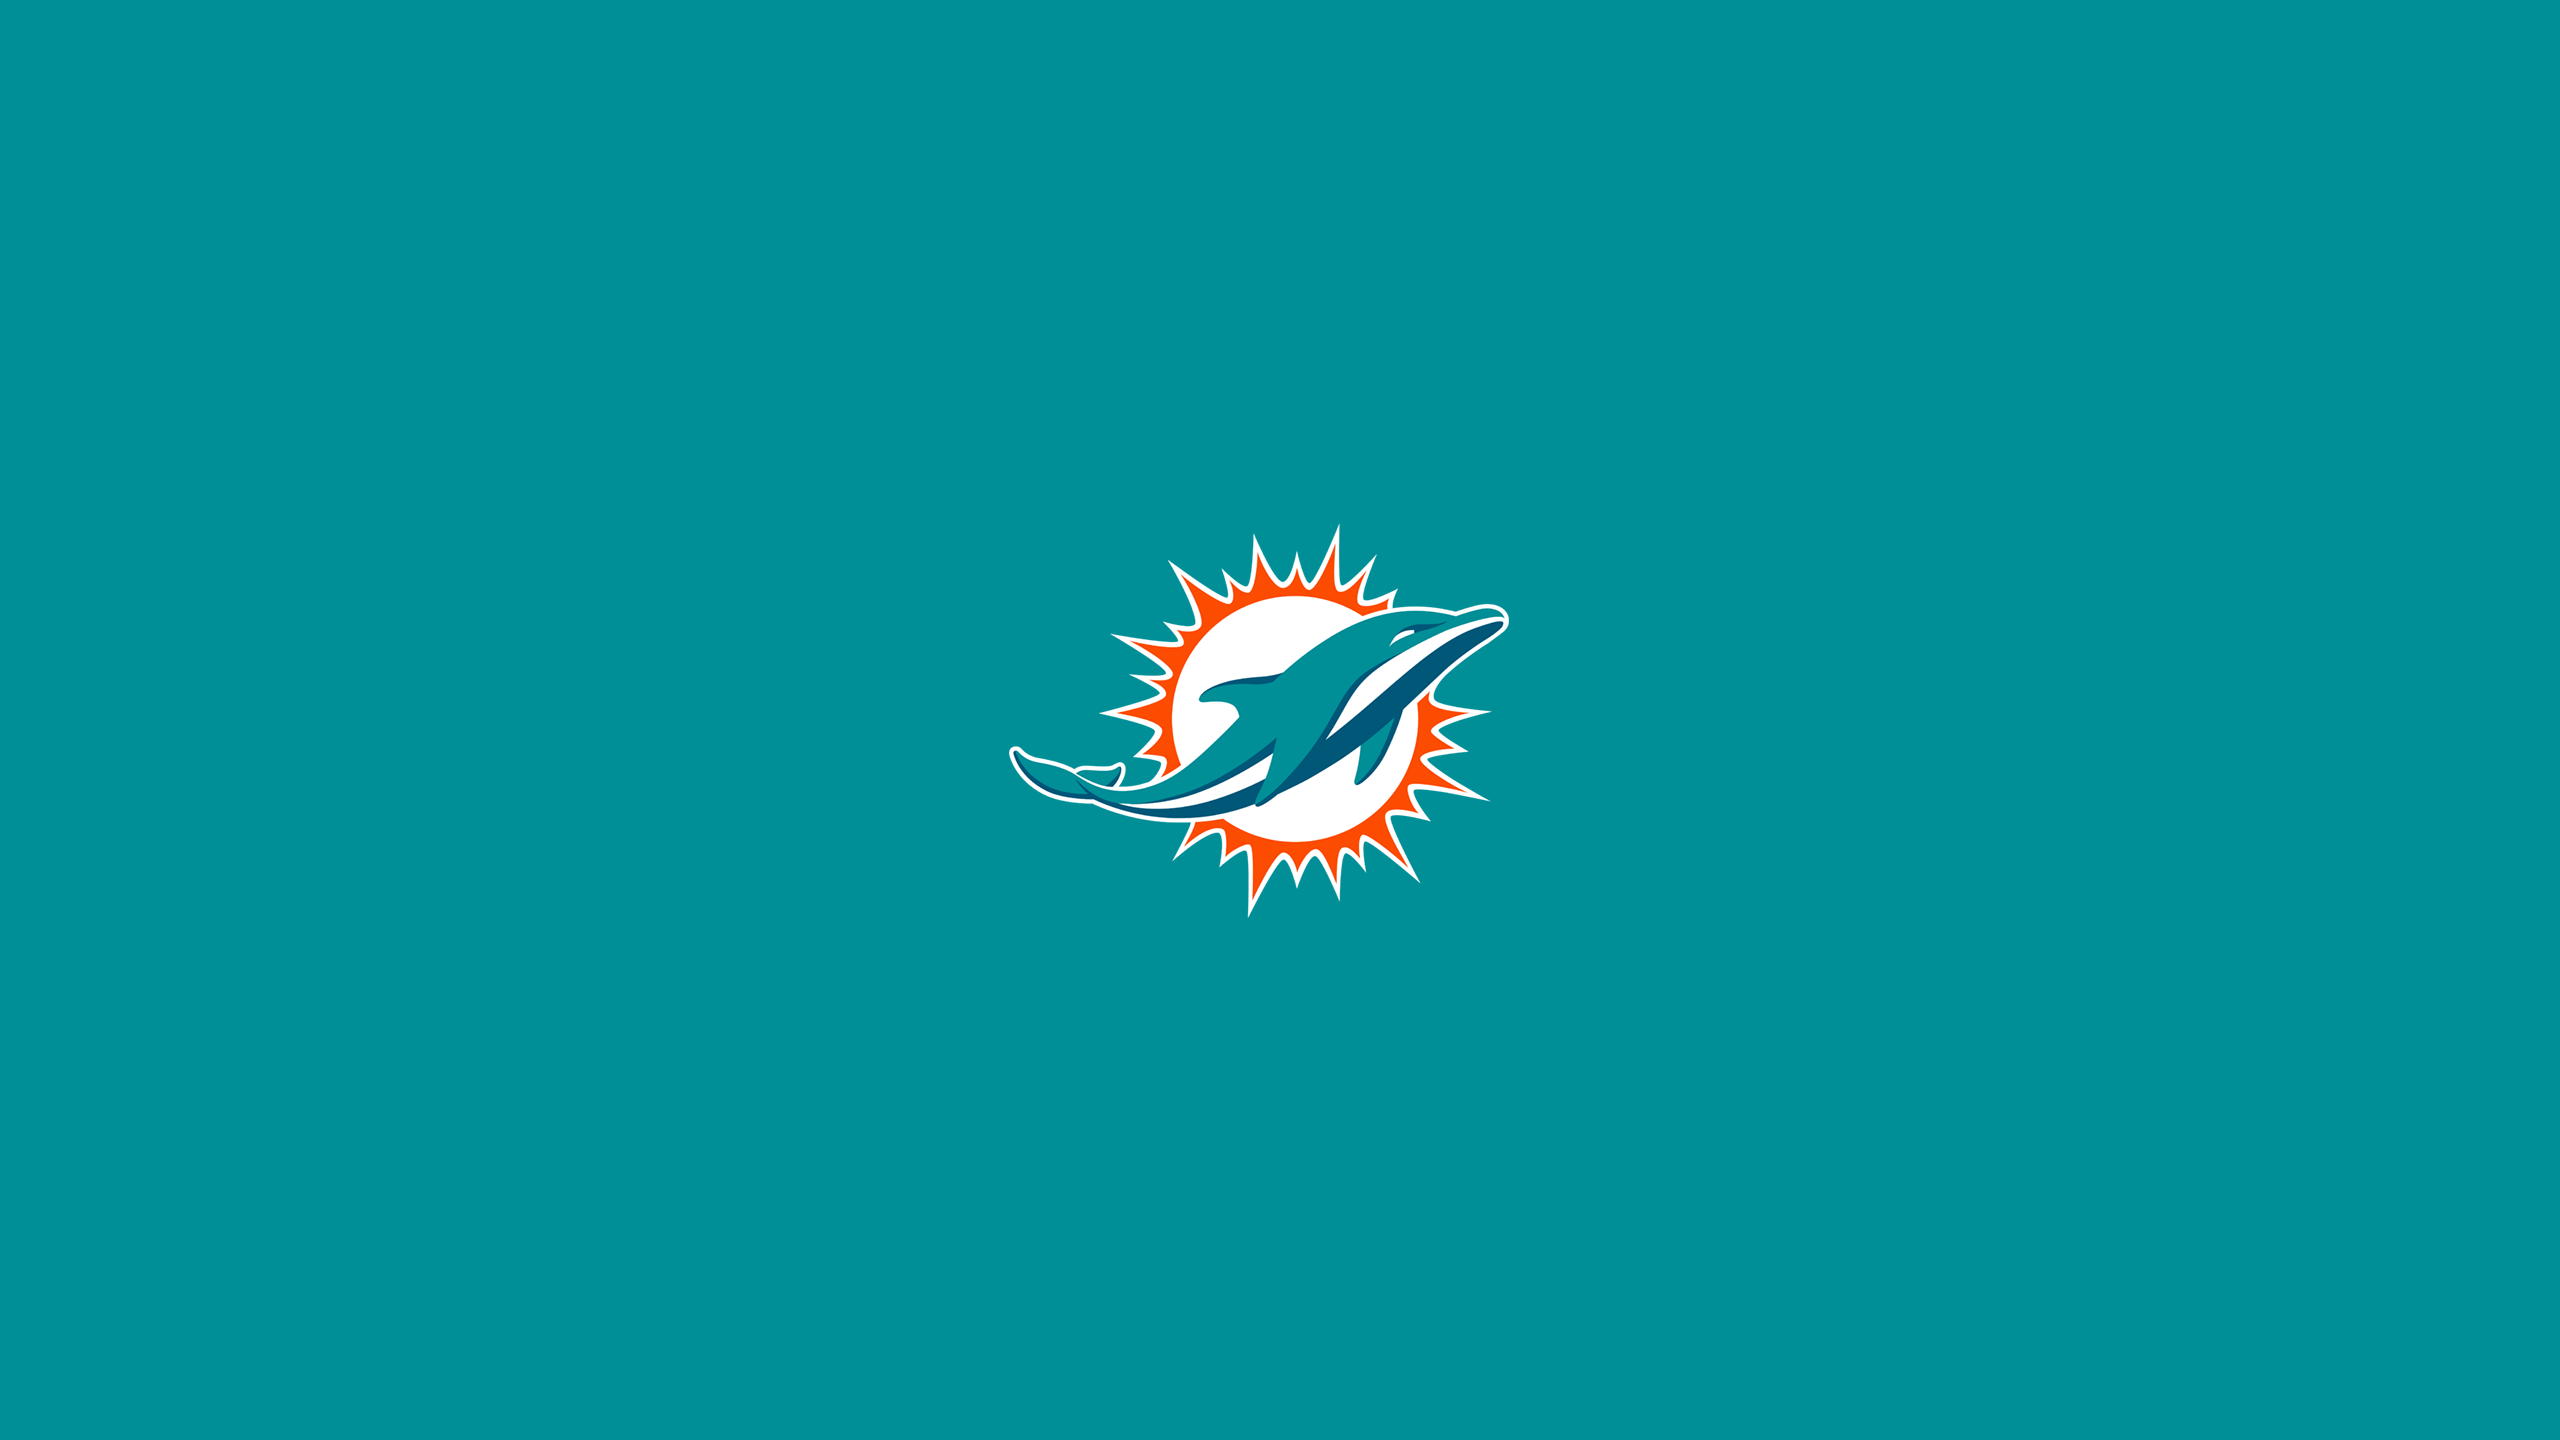 Miami Dolphins - NFL - Square Bettor